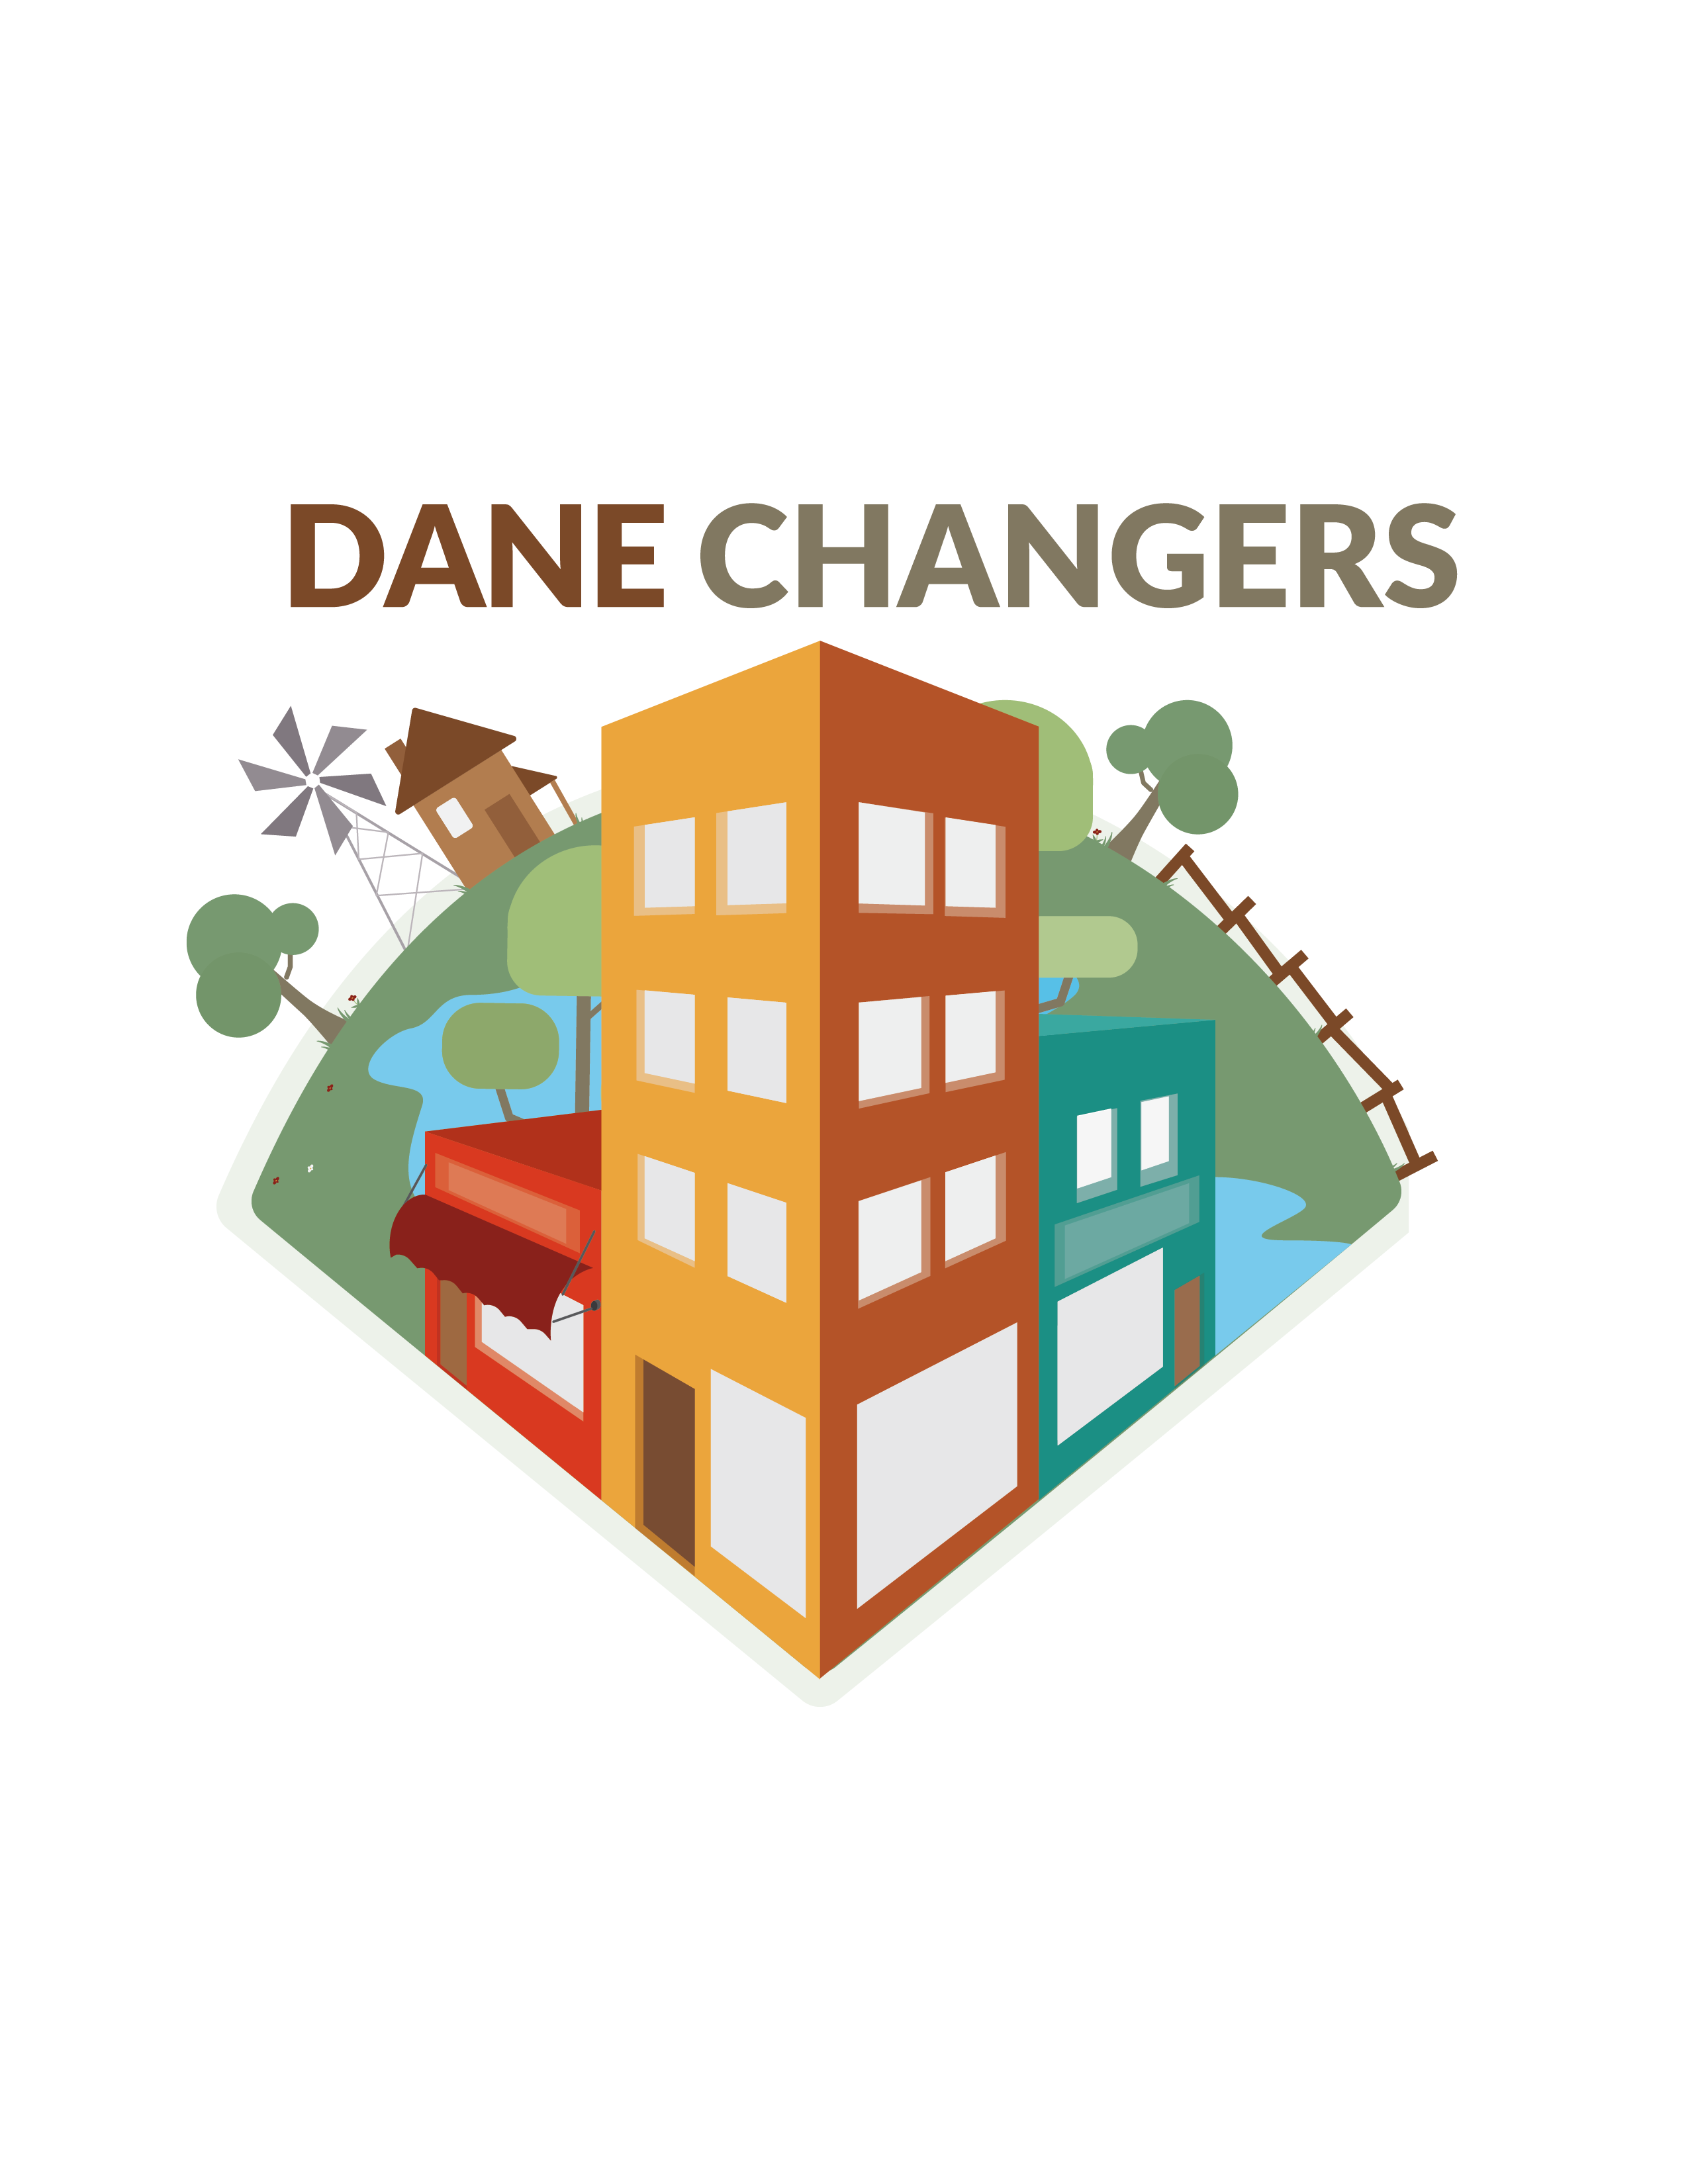 United Way’s ‘Dane Changers’ teaches players how they can help in community